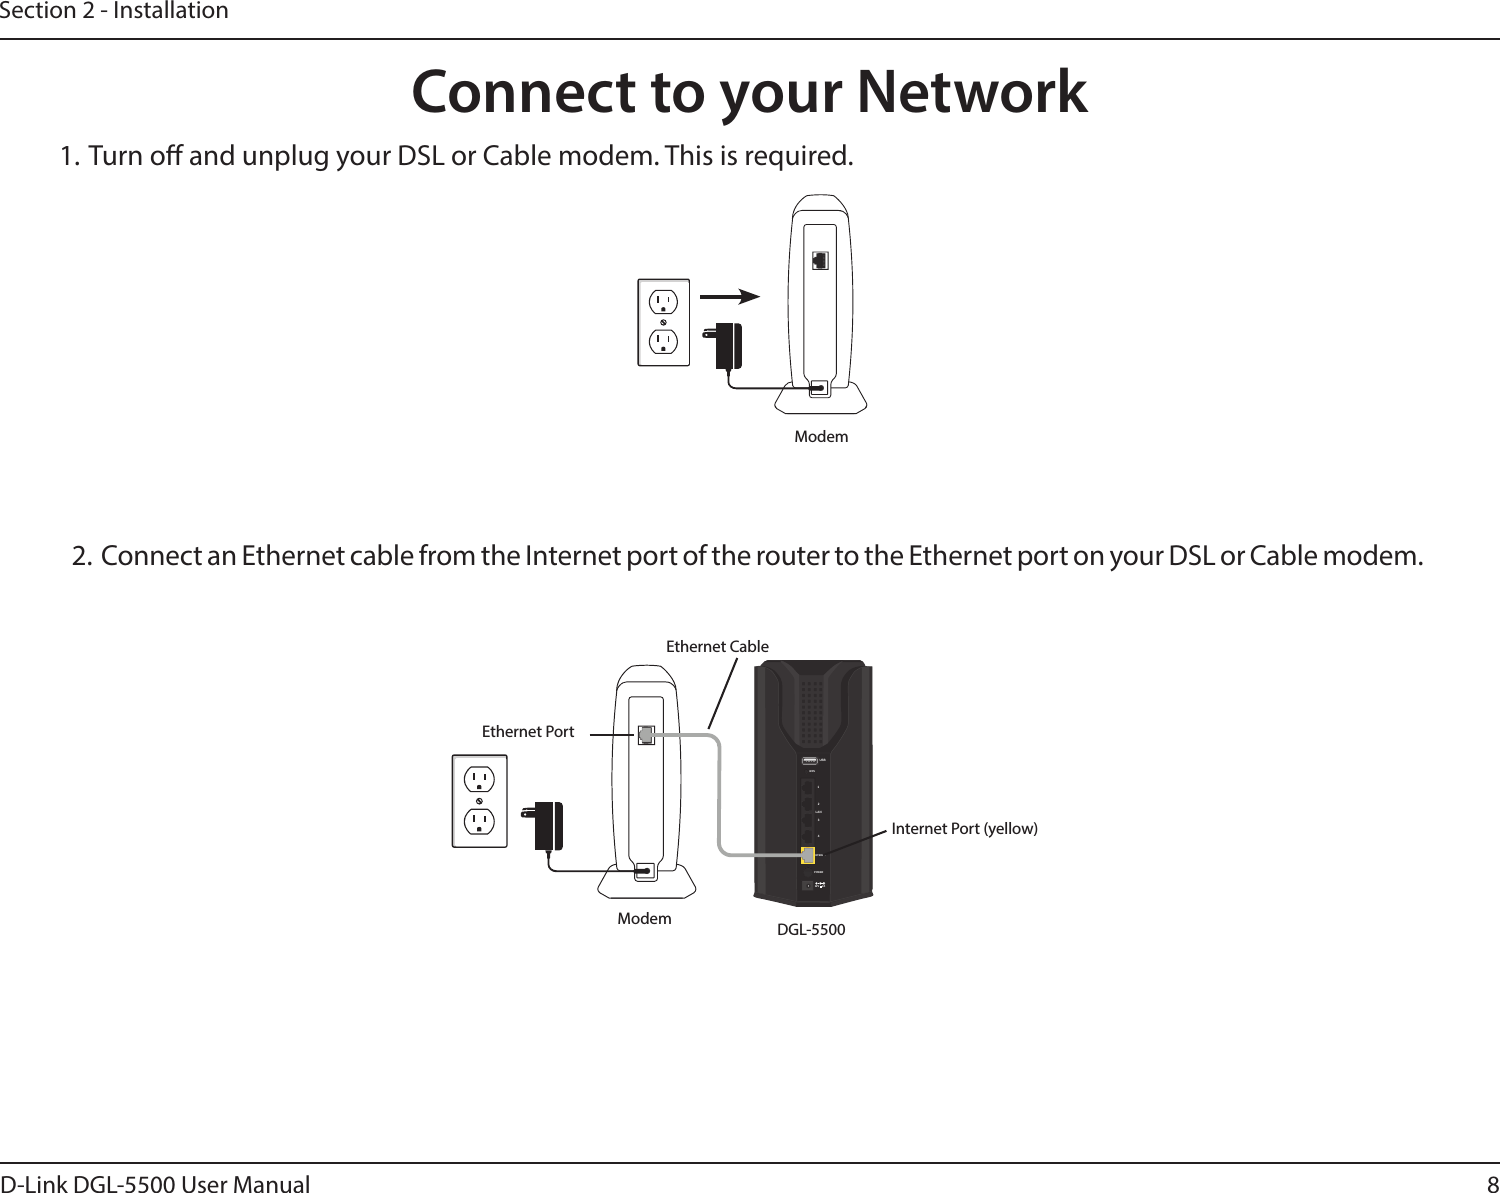 8D-Link DGL-5500 User ManualSection 2 - Installation1. Turn o and unplug your DSL or Cable modem. This is required.Connect to your NetworkModem2.  Connect an Ethernet cable from the Internet port of the router to the Ethernet port on your DSL or Cable modem.12V2AUSBWPS123LAN4INTERNETPOWERModem DGL-5500Ethernet PortEthernet CableInternet Port (yellow)